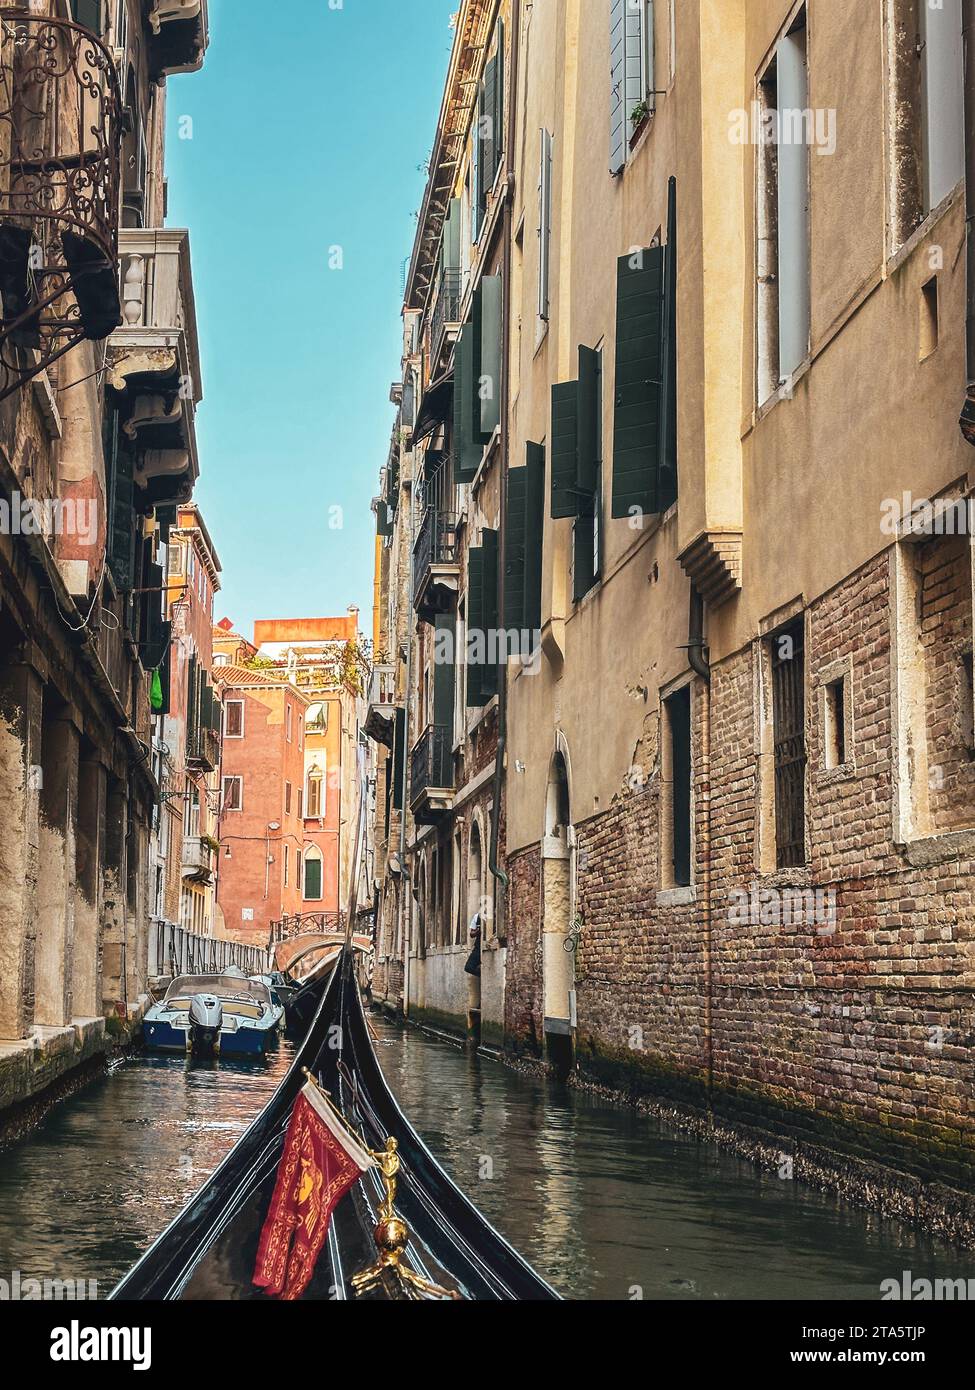 Gondola moving between houses in narrow canals within the city of Venice, Italy Stock Photo